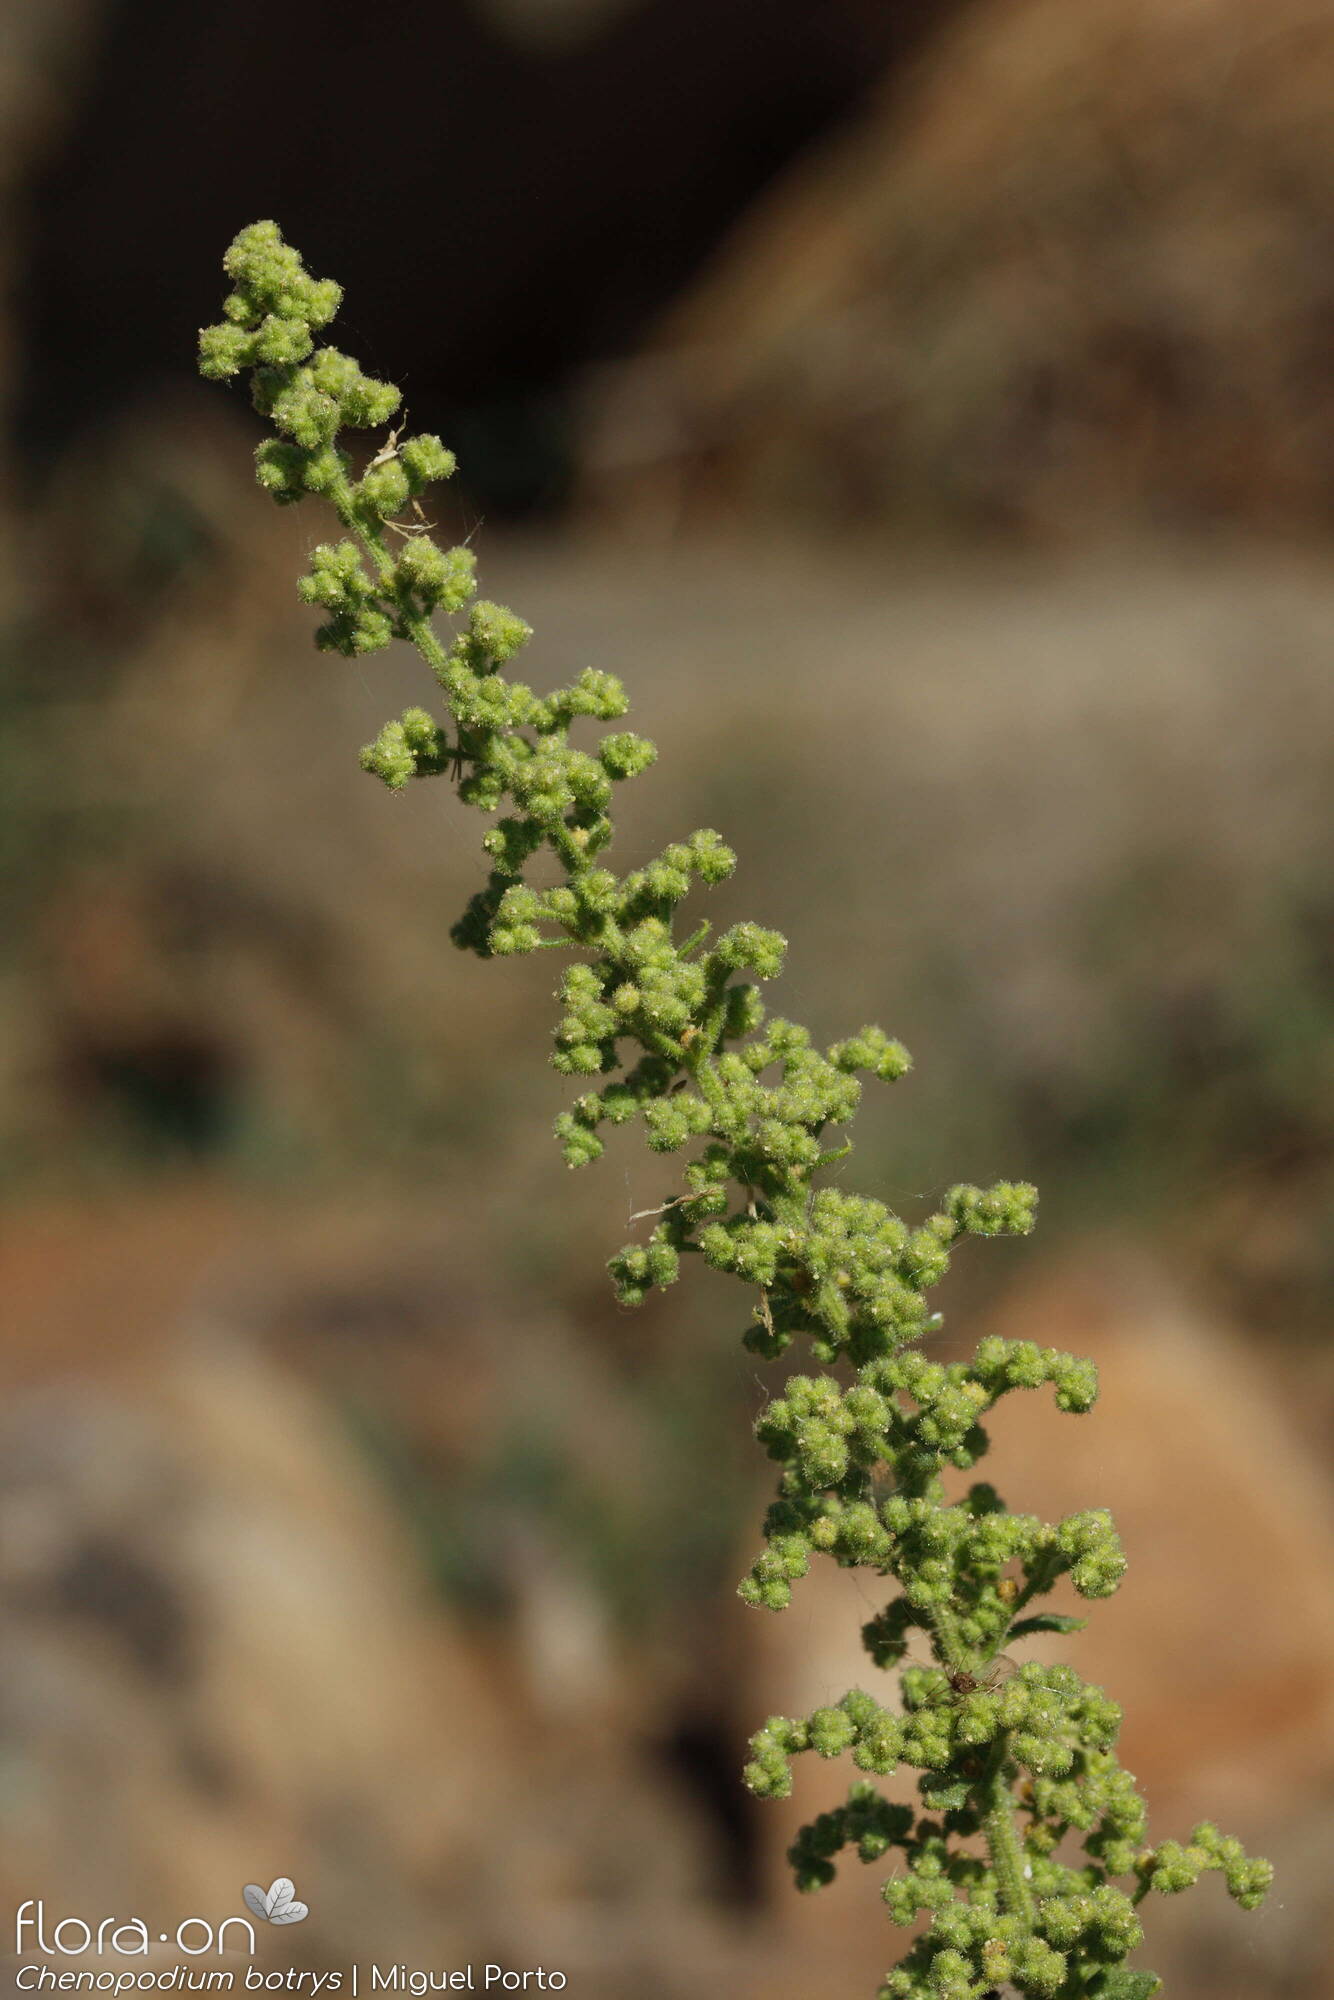 Chenopodium botrys - Flor (geral) | Miguel Porto; CC BY-NC 4.0